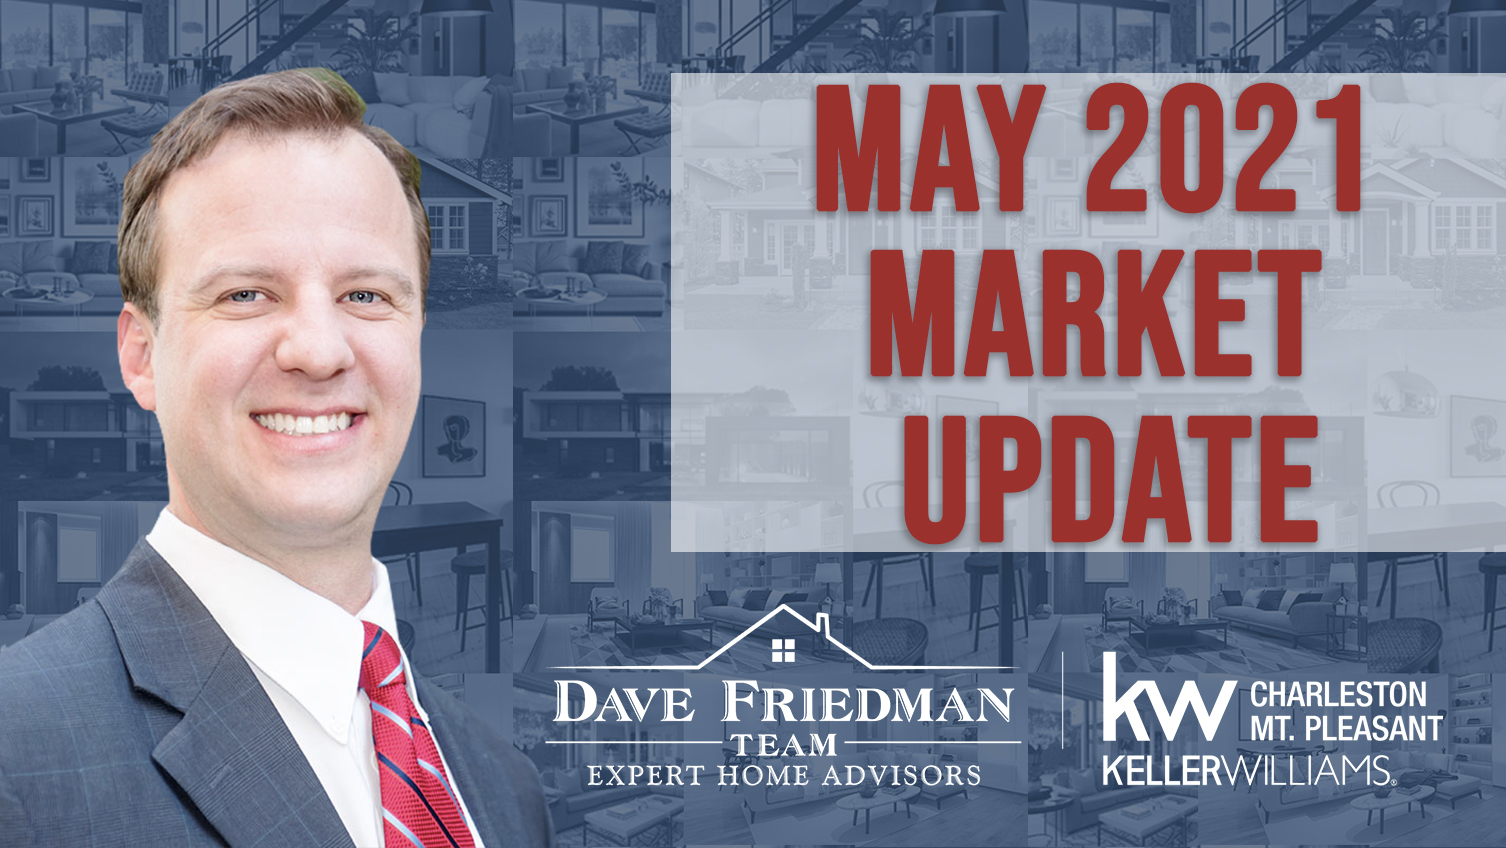 Our Latest Real Estate Update